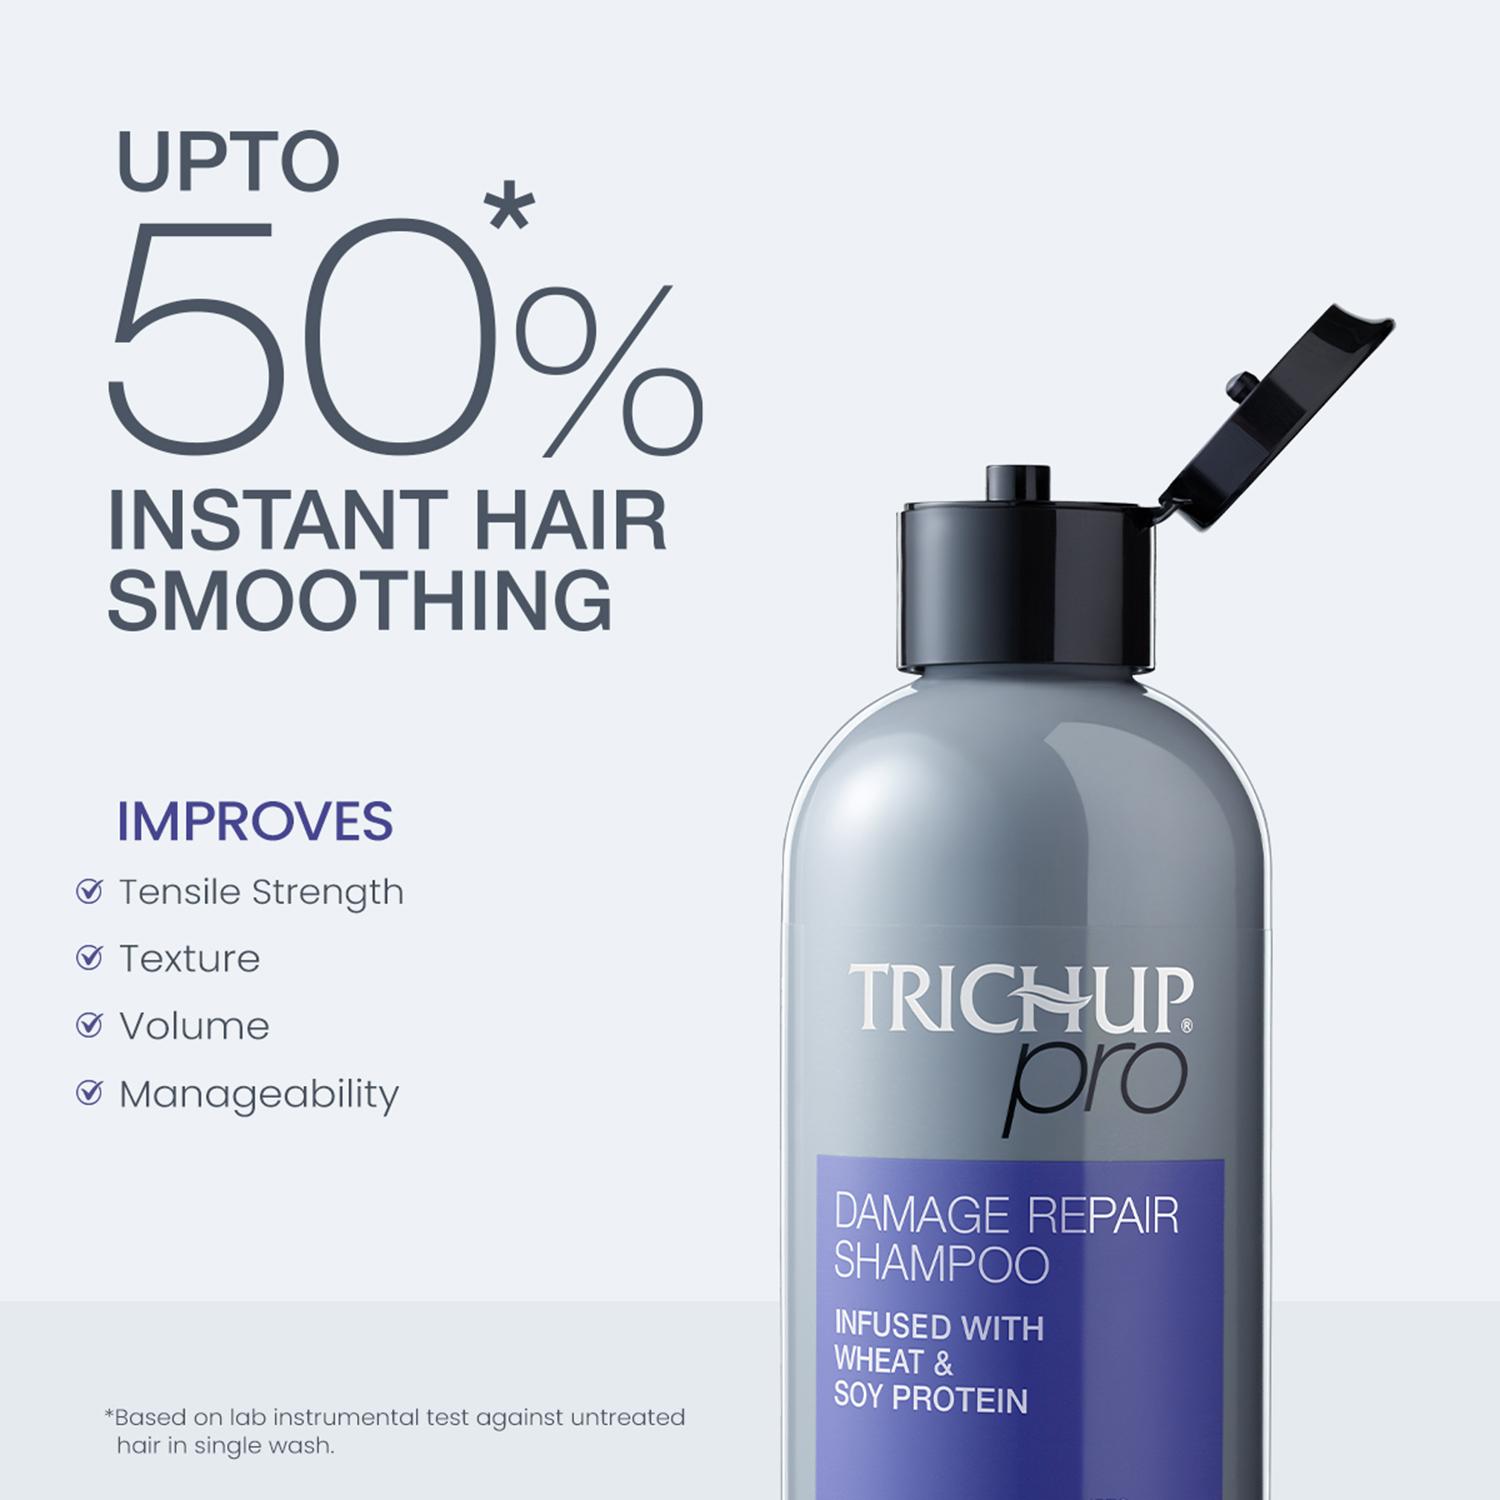 Trichup | Trichup Pro Damage Repair Shampoo for Dry Frizzy Hair, Dual Action Rebonding and Smoothing (300 ml)